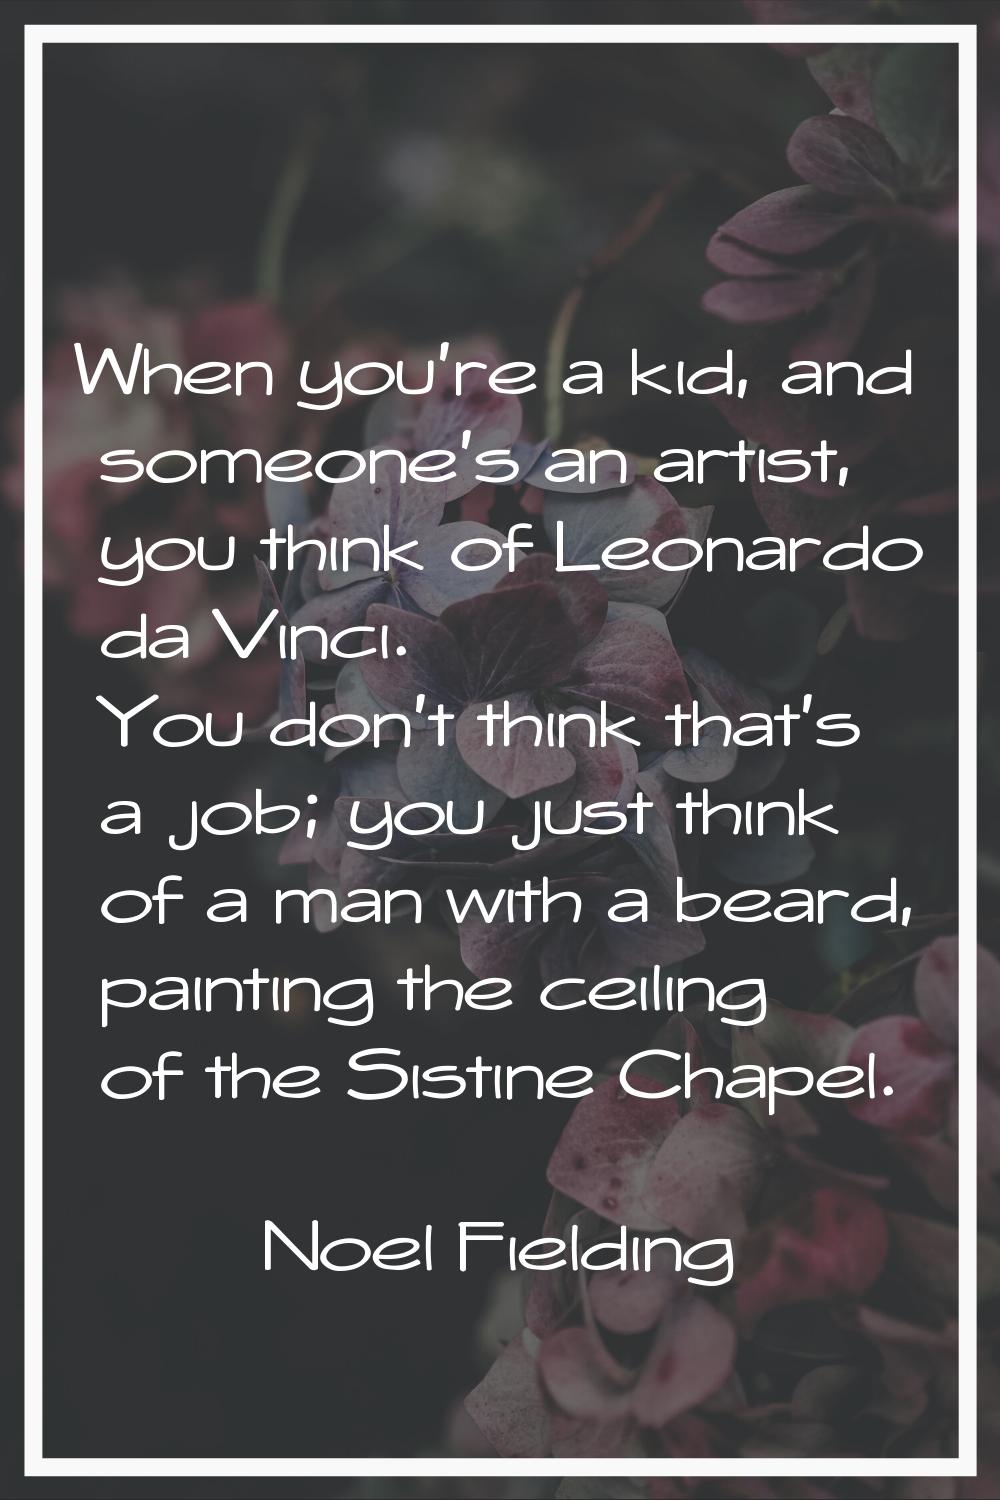 When you're a kid, and someone's an artist, you think of Leonardo da Vinci. You don't think that's 